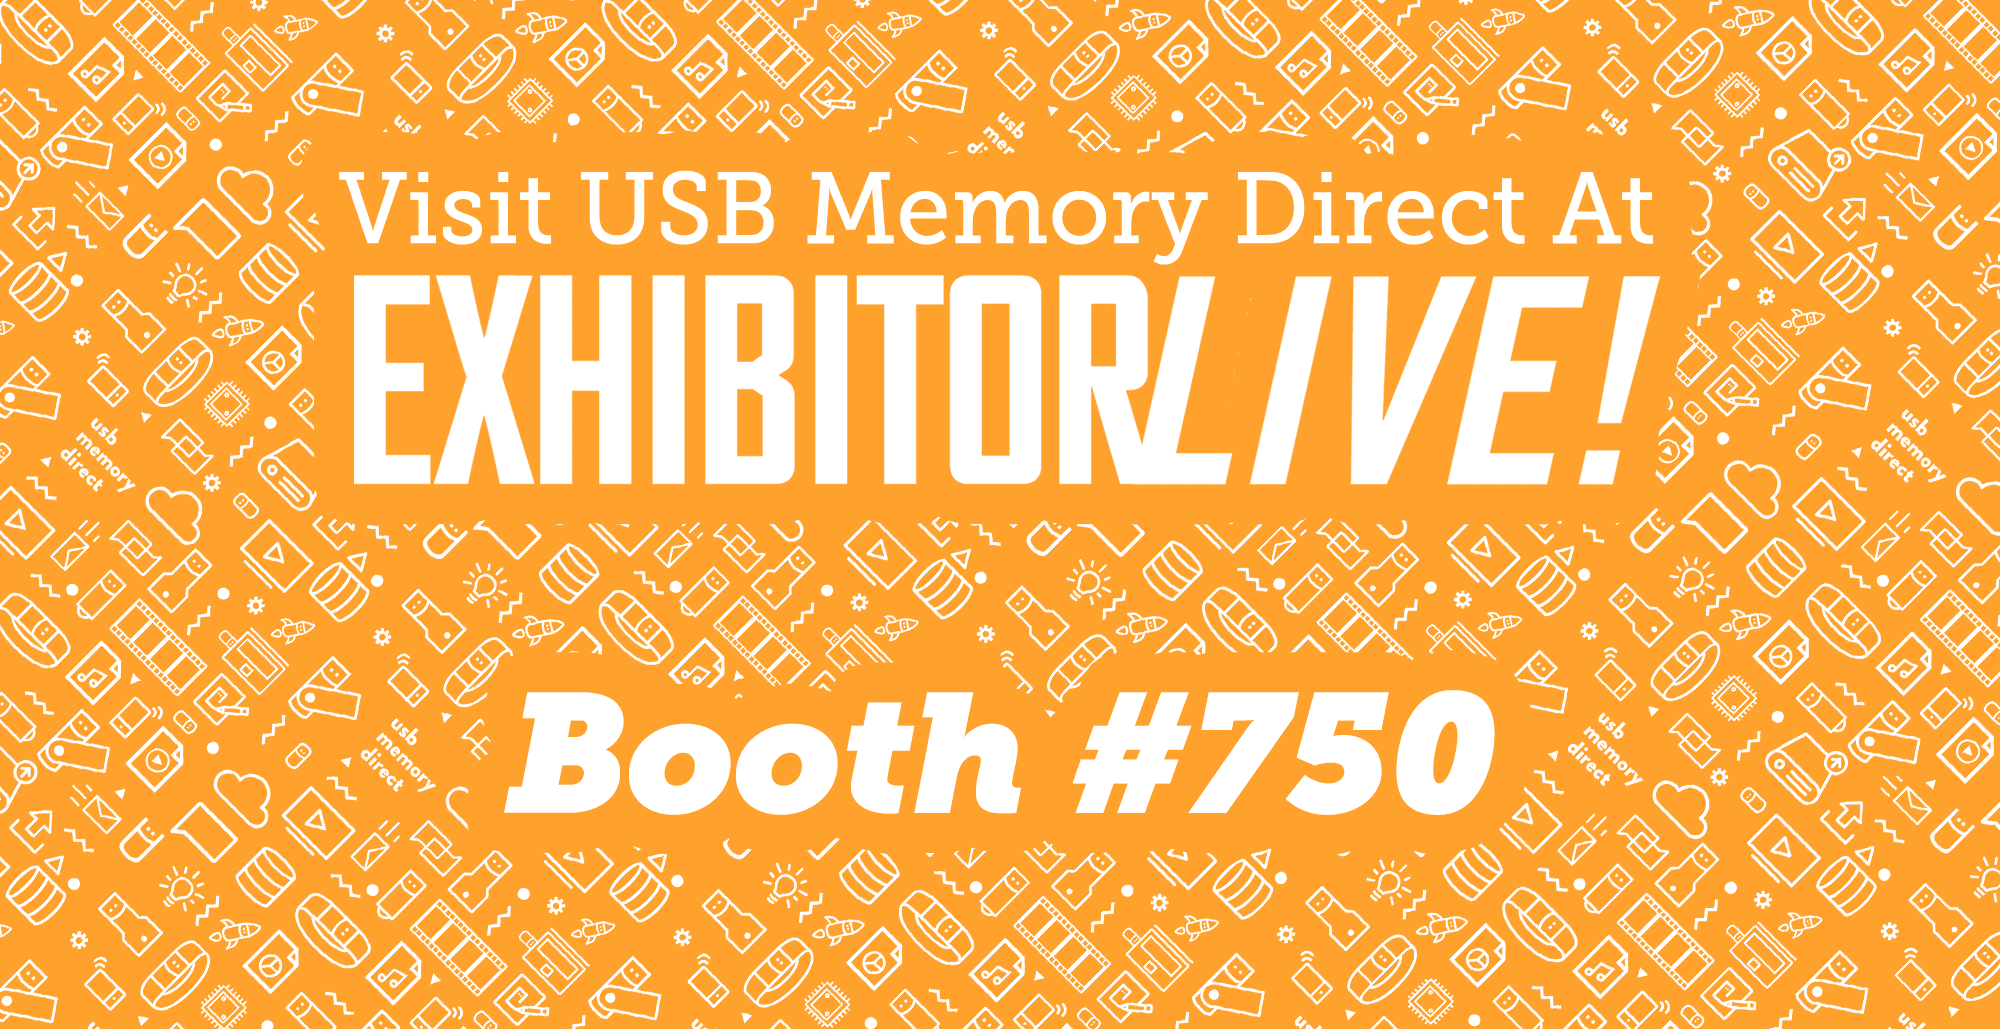 Come visit USB Memory Direct at ExhibitorLive booth #750